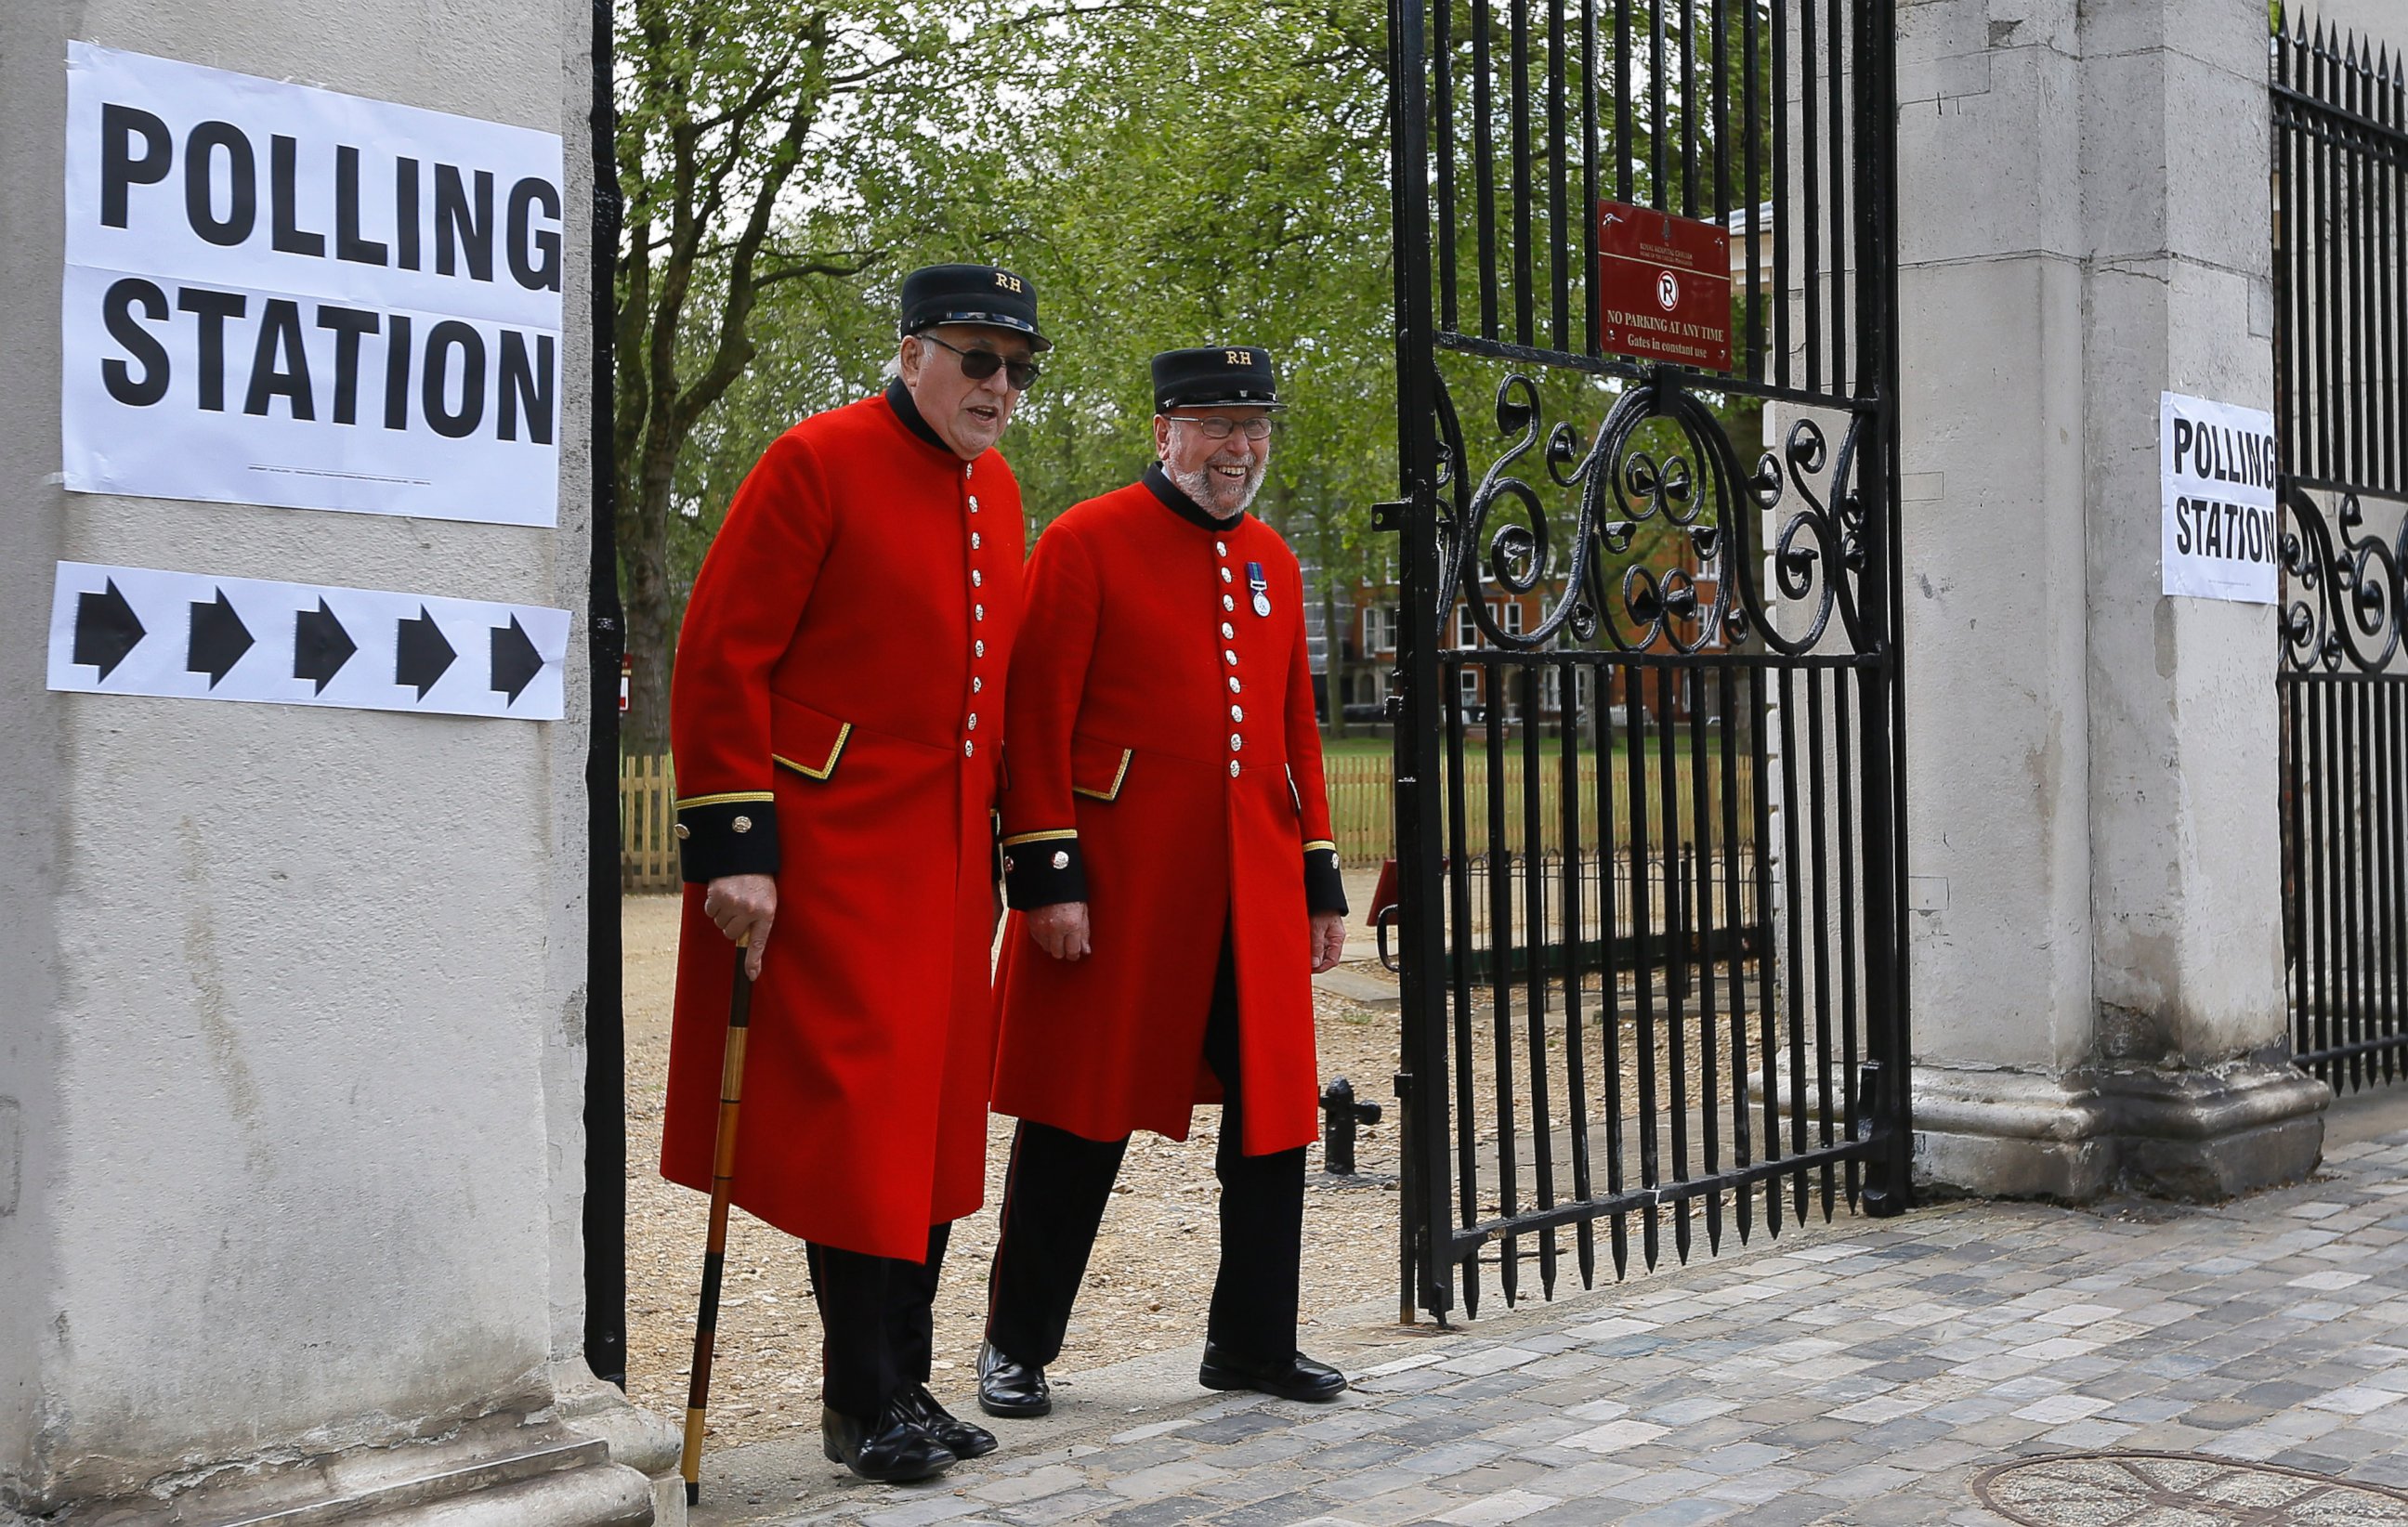 PHOTO: Chelsea Pensioners smile as they see the media after voting at a polling station in London, May 7, 2015.